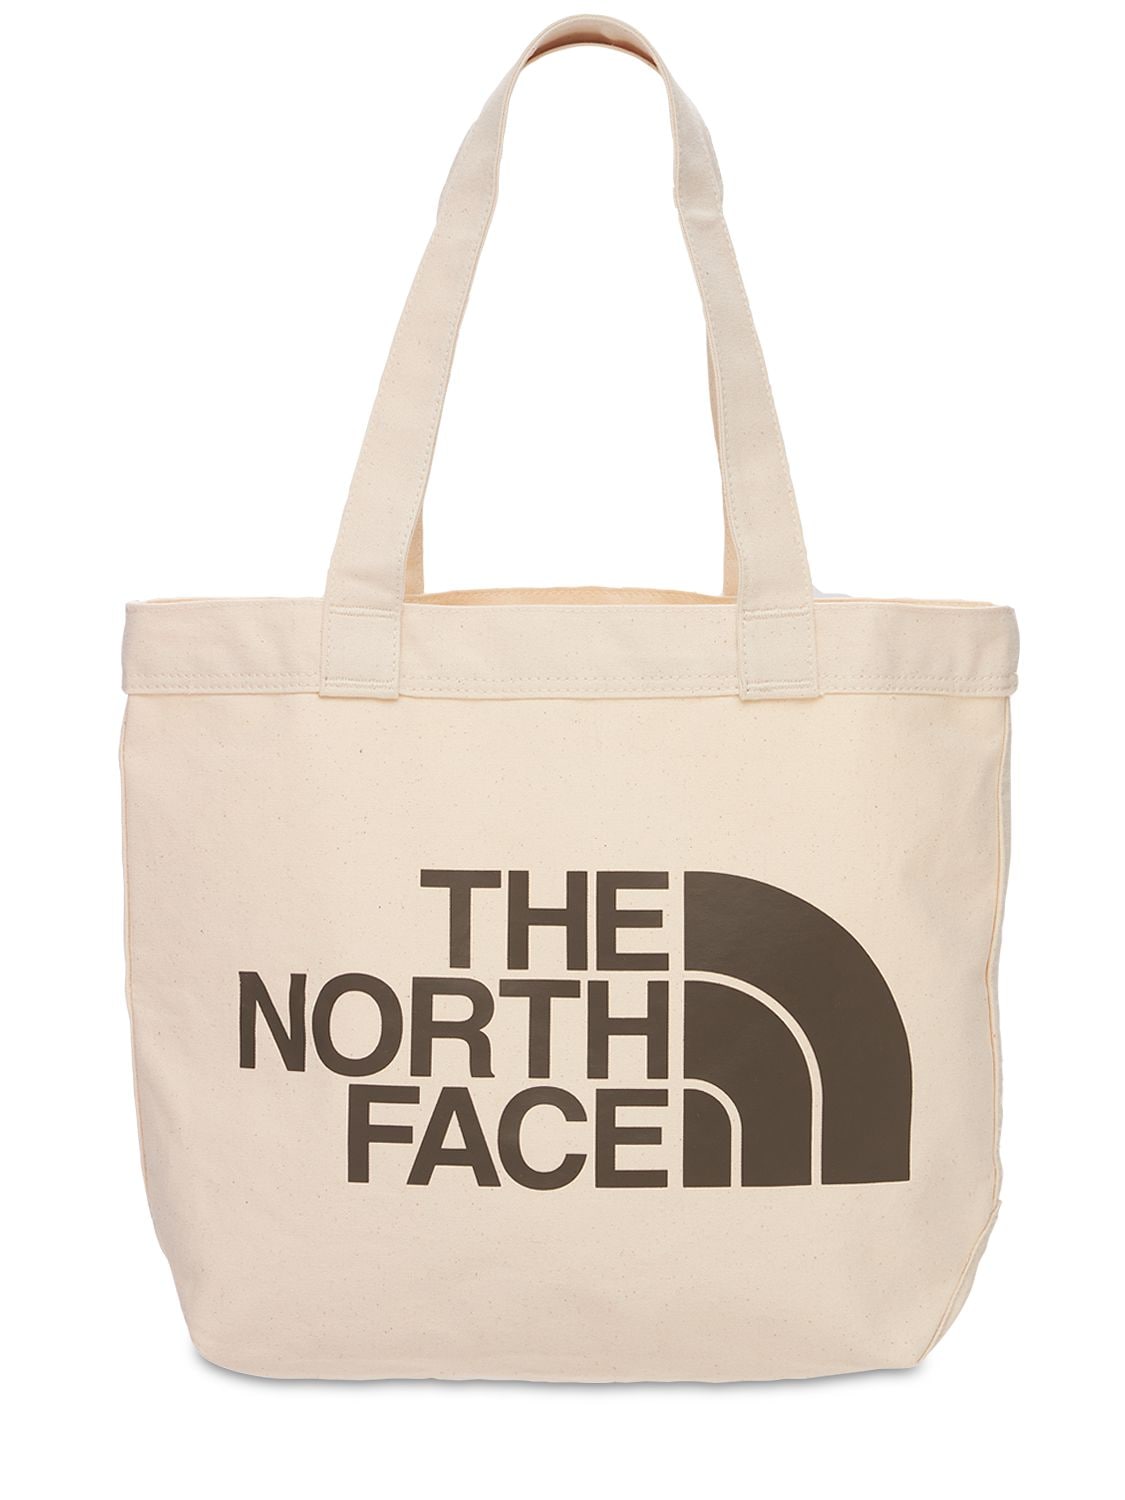 The North Face 印图托特包 In Weiss